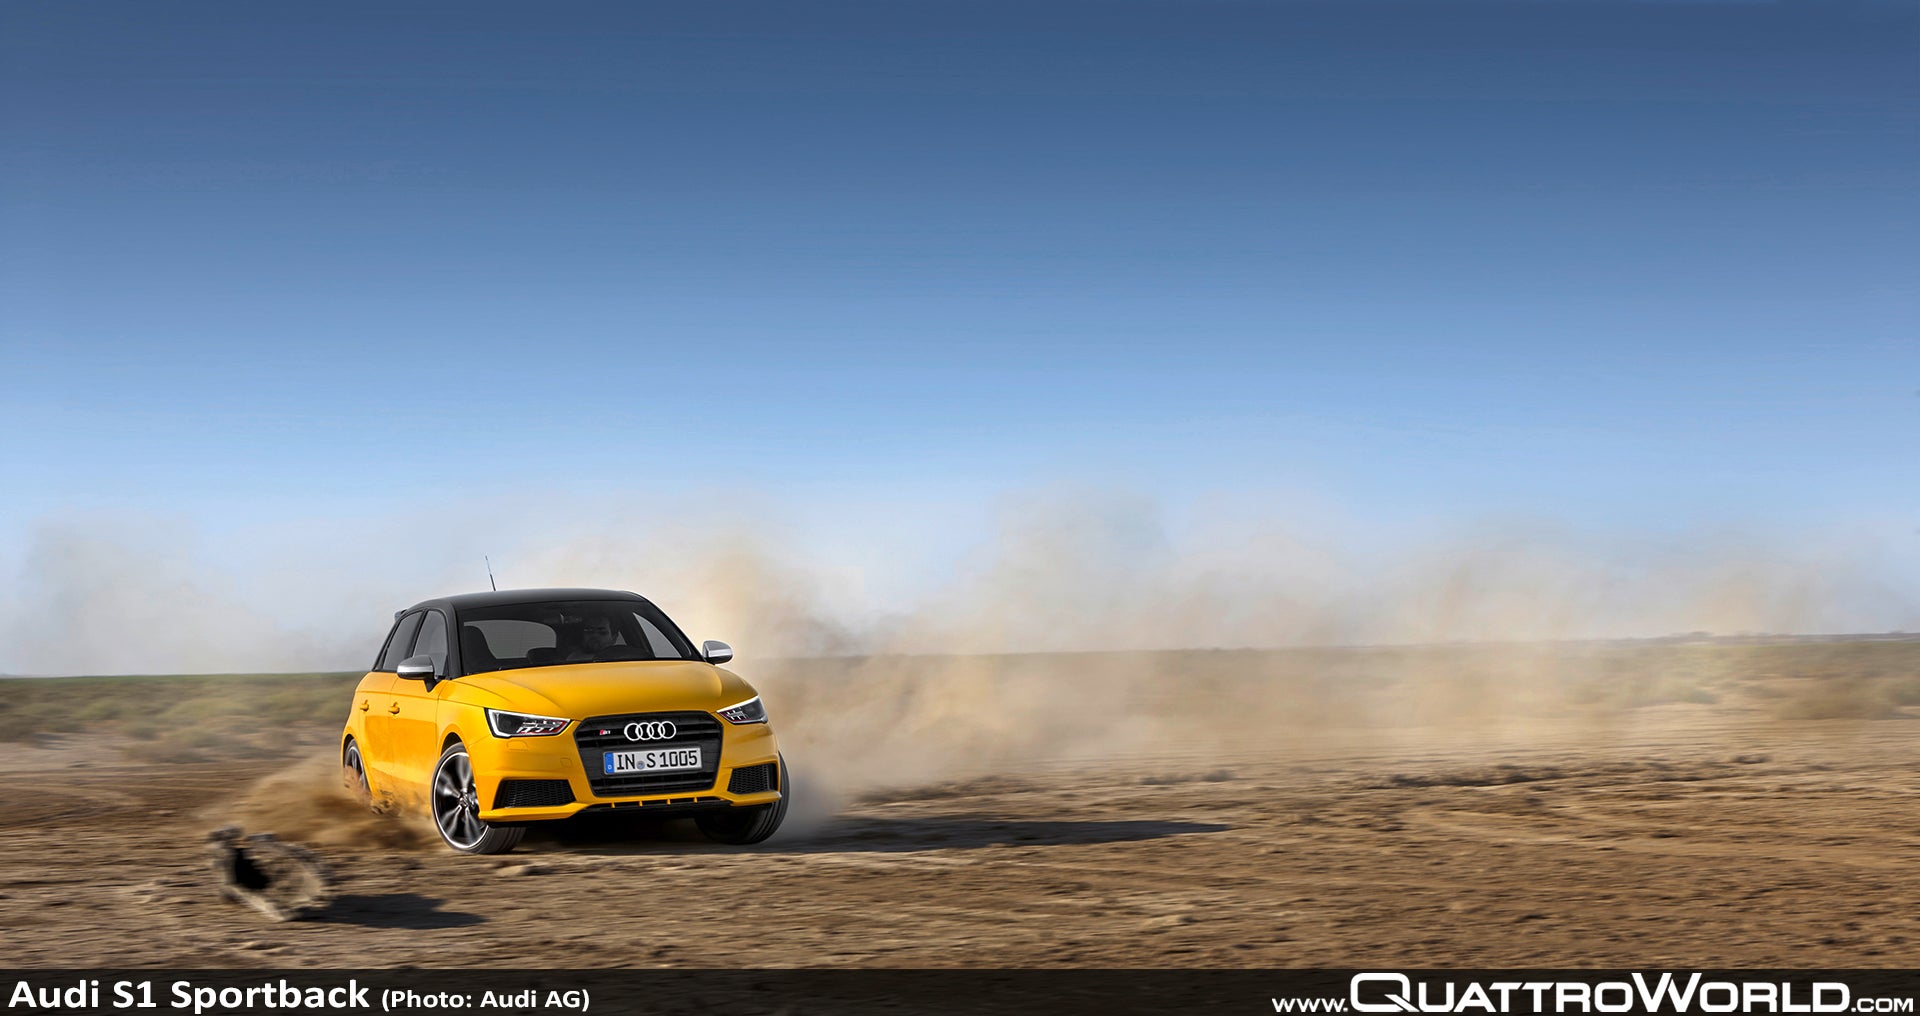 Audi AG: The Audi S1 and the Audi S1 Sportback - QuattroWorld